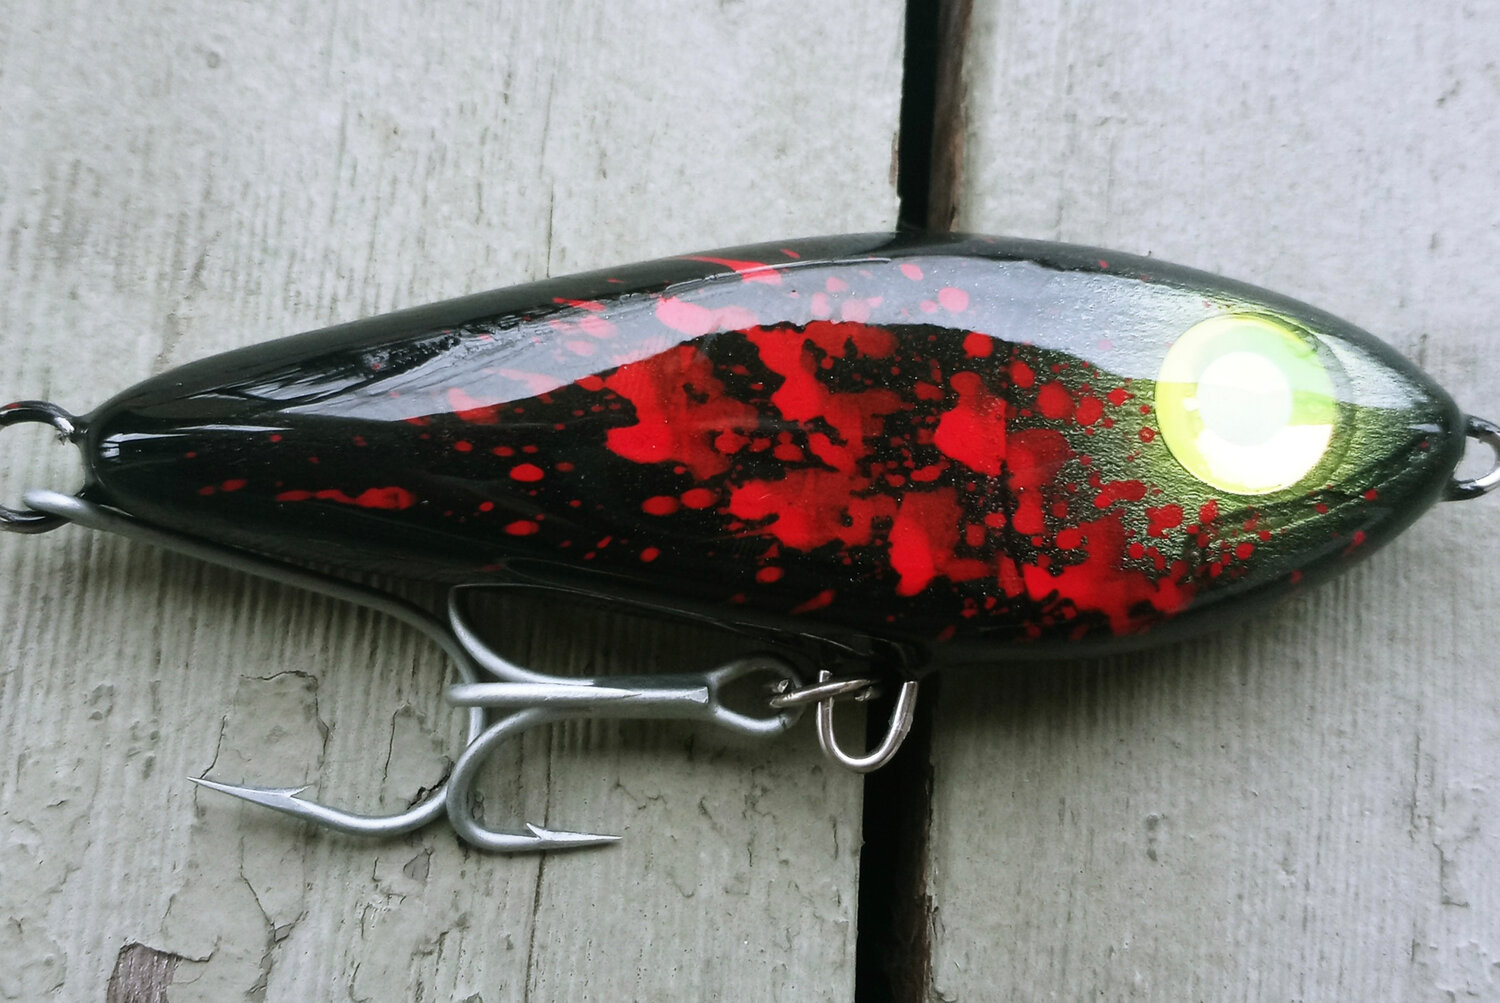 The Predator: A sinking glide bait designed for large fish